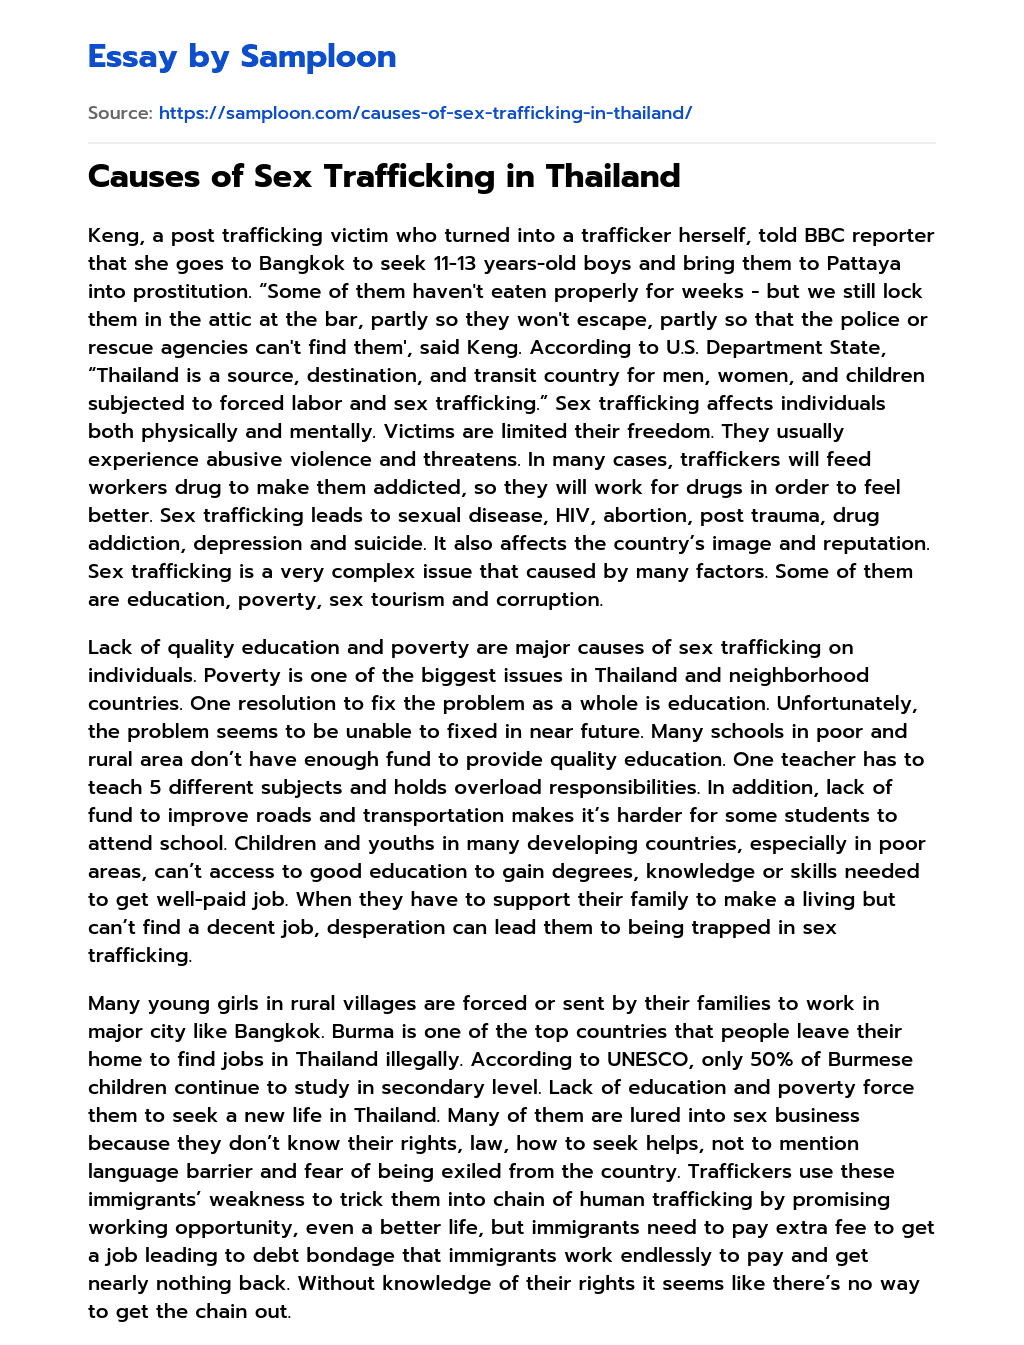 Causes of Sex Trafficking in Thailand essay